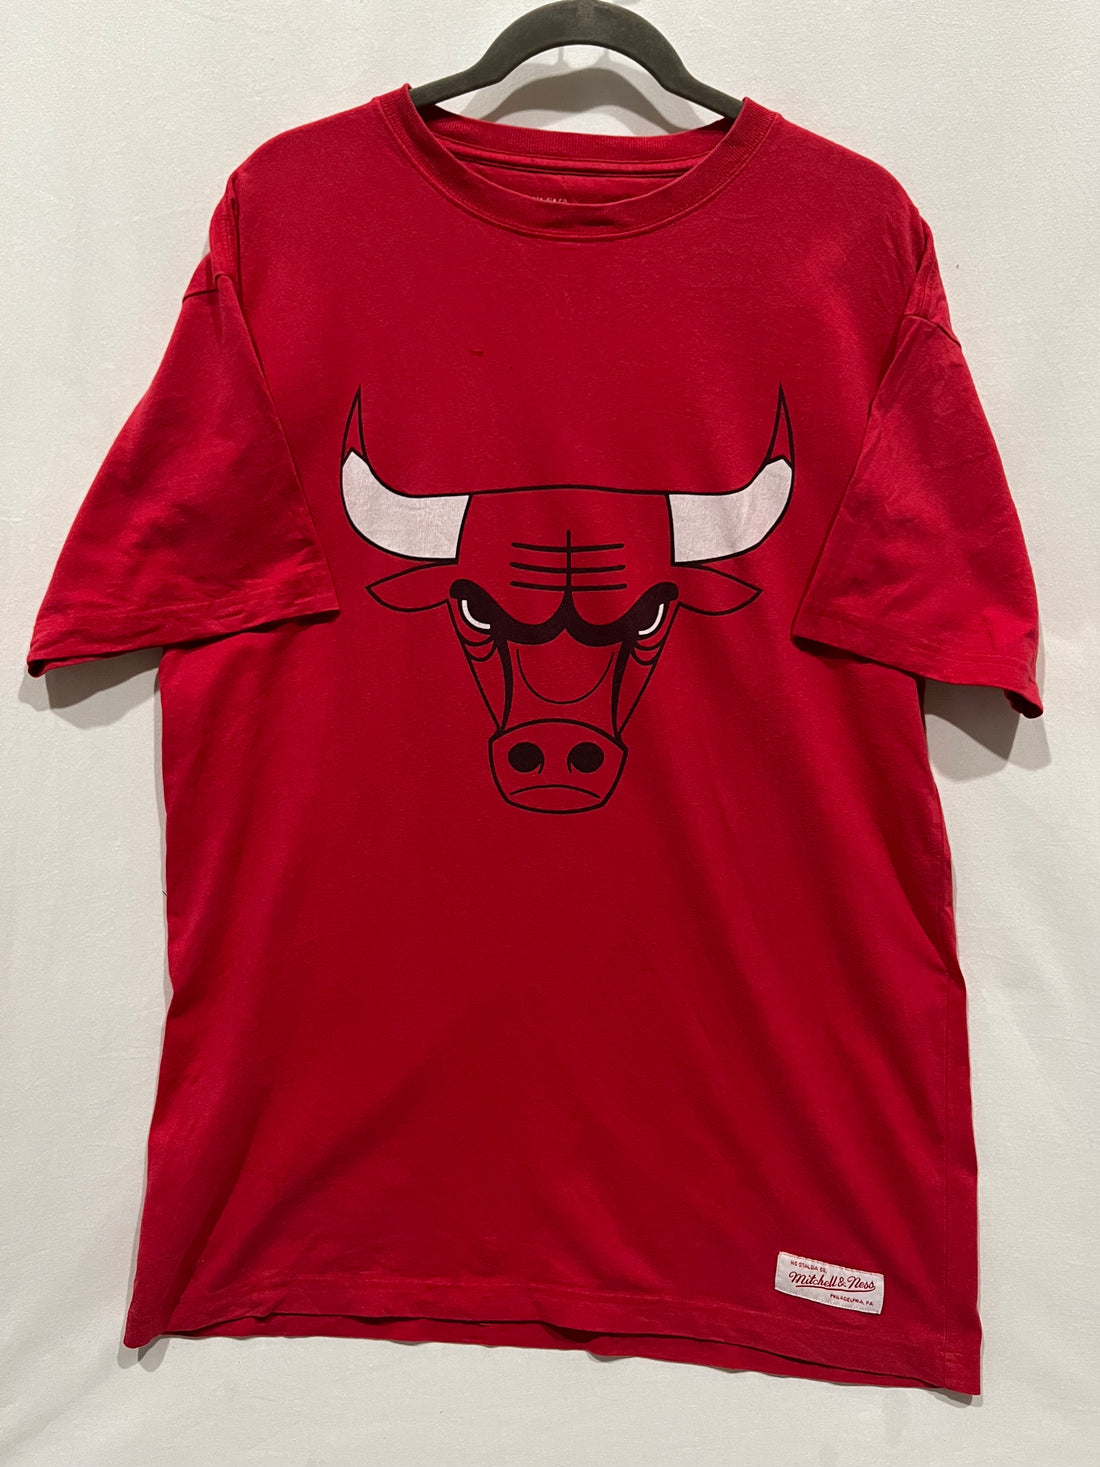 Vintage Chicago Bulls Mitchell & Ness T-Shirt | Rare Finds